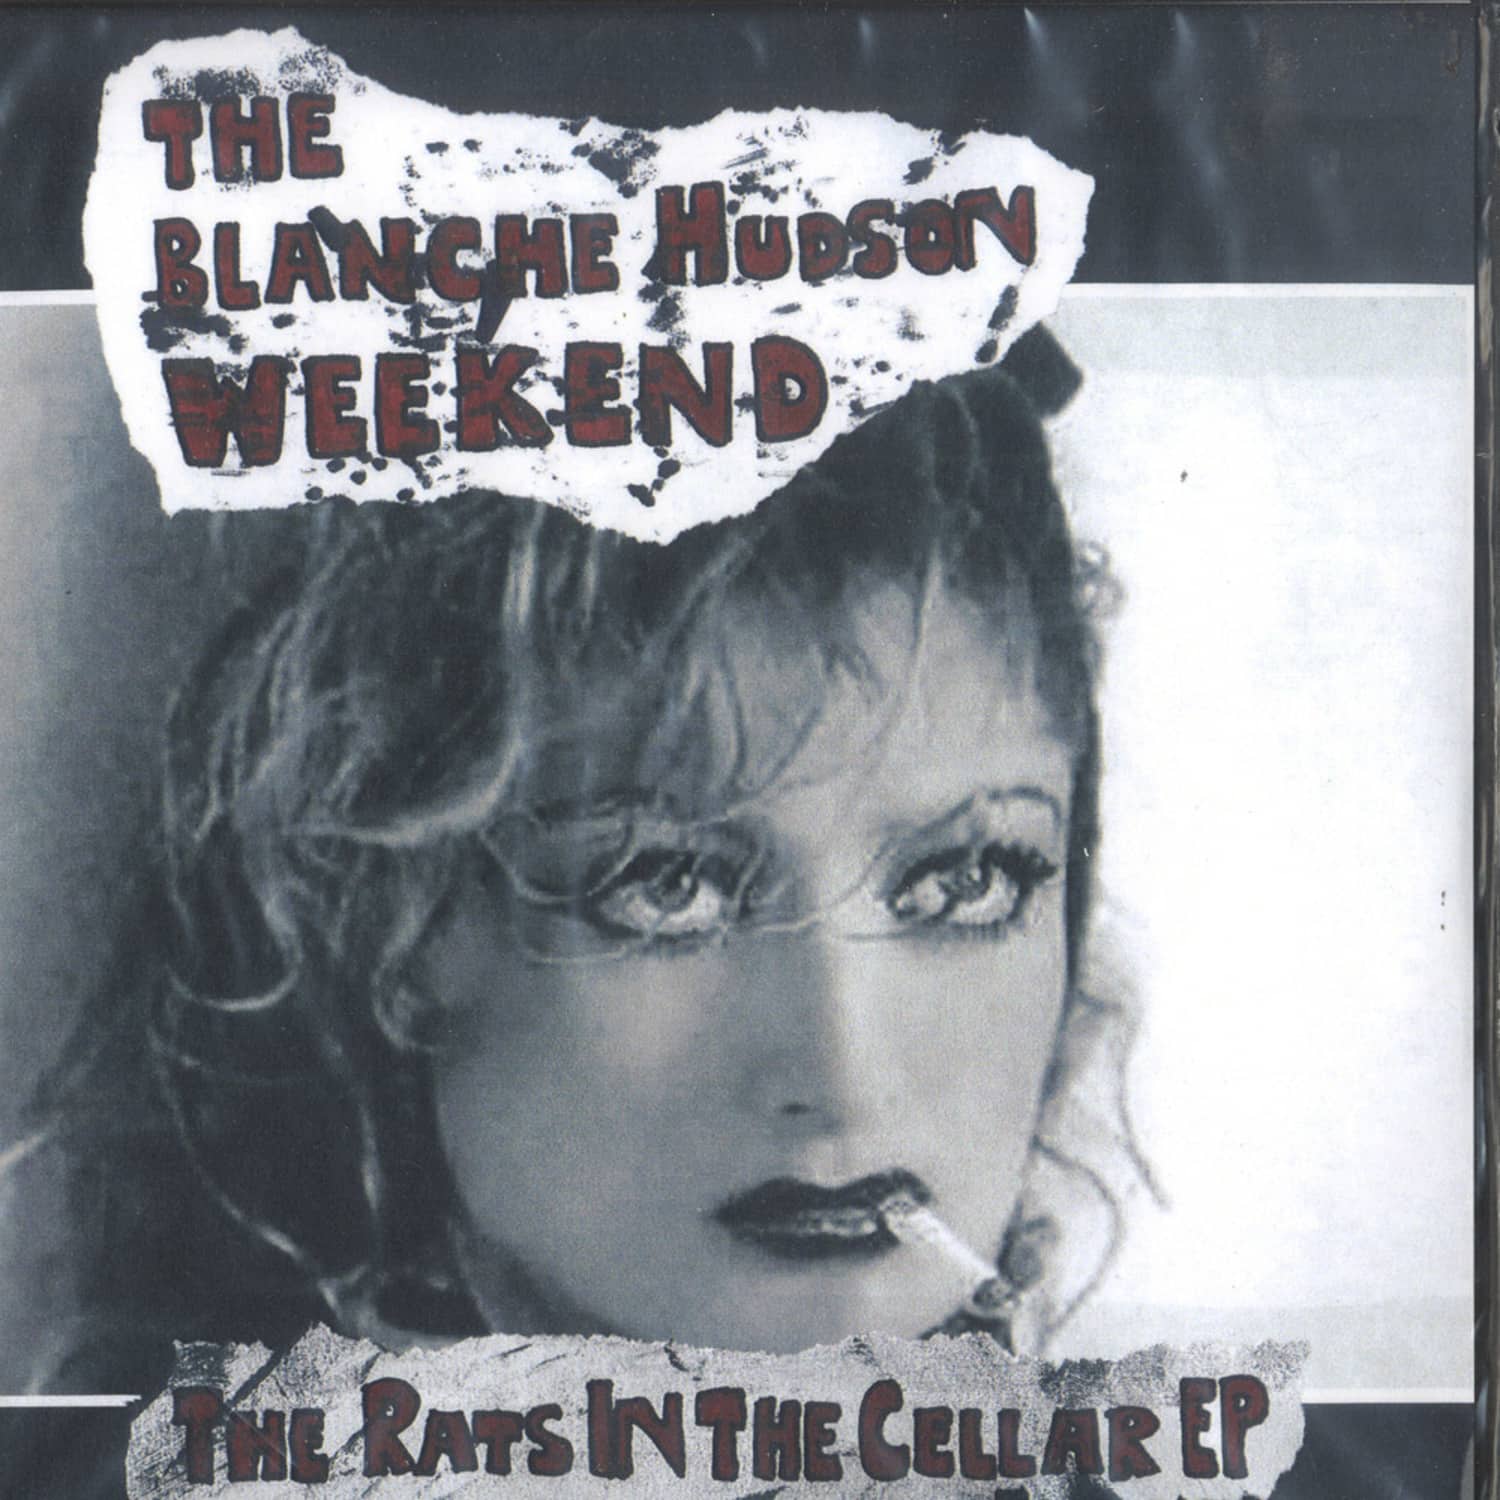 Blanche Hudson Weekend - THE RAT IN THE CELLAR EP 